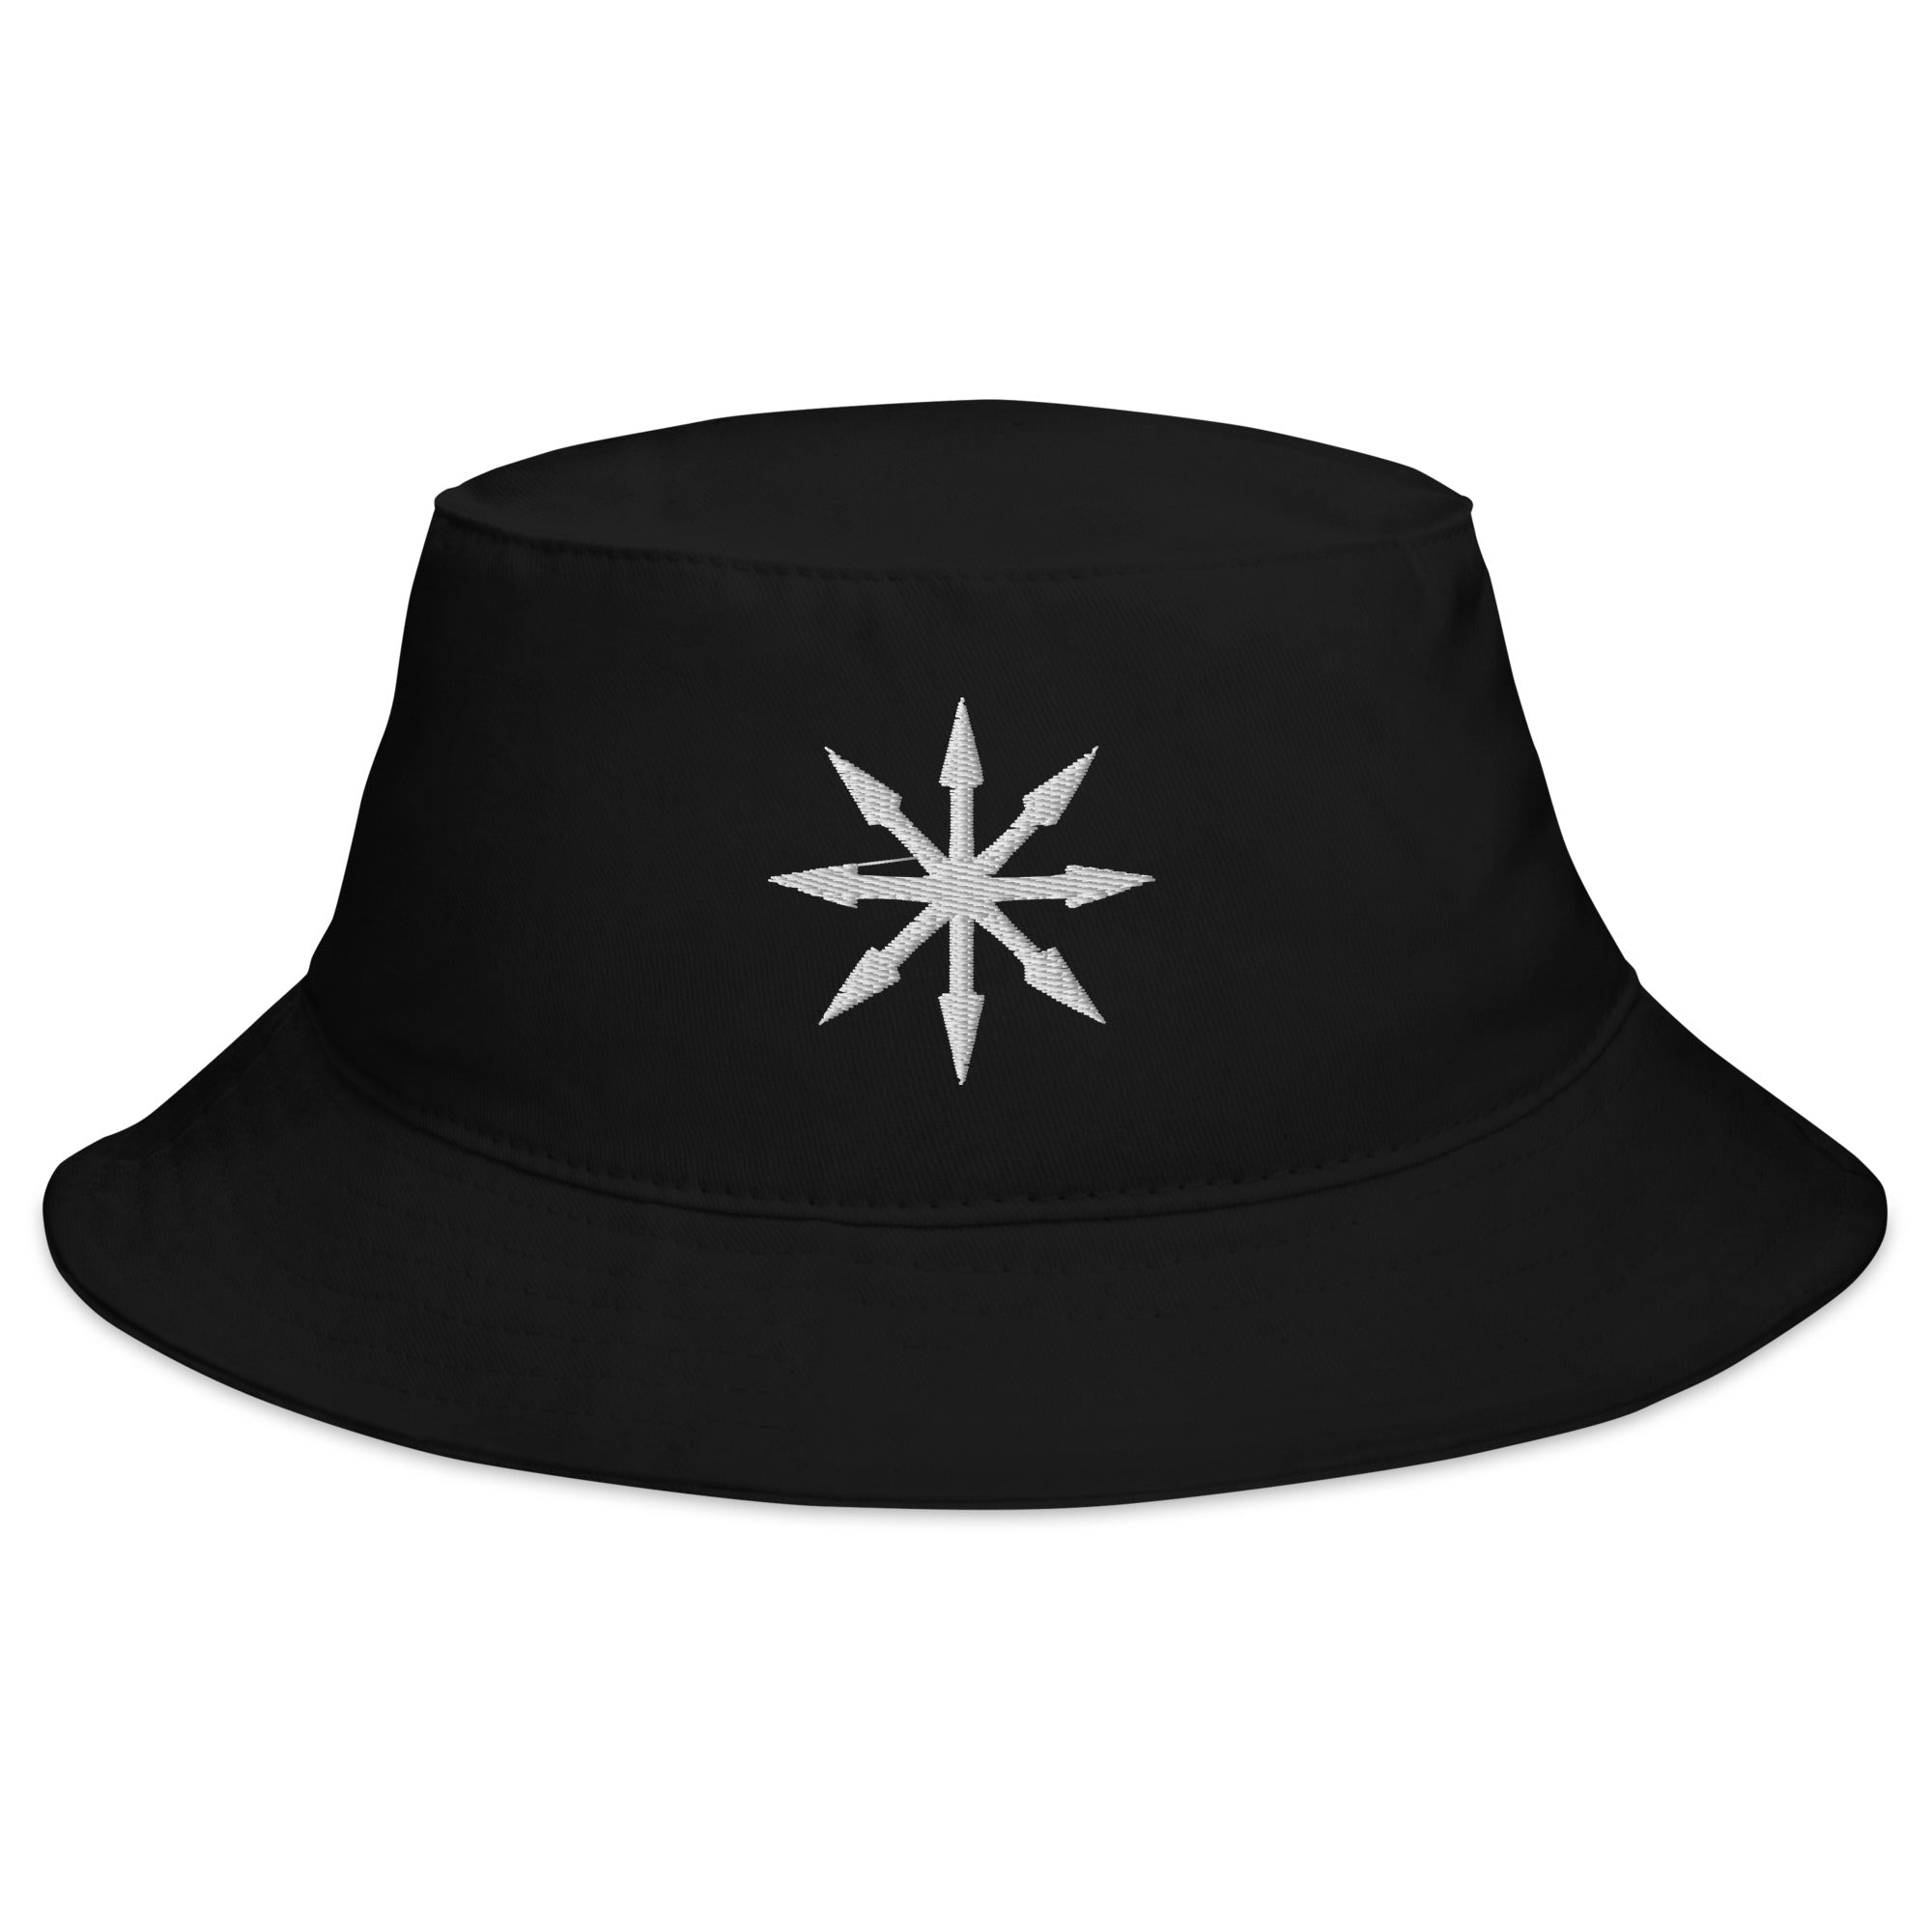 The Symbol of Chaos Embroidered Bucket Hat